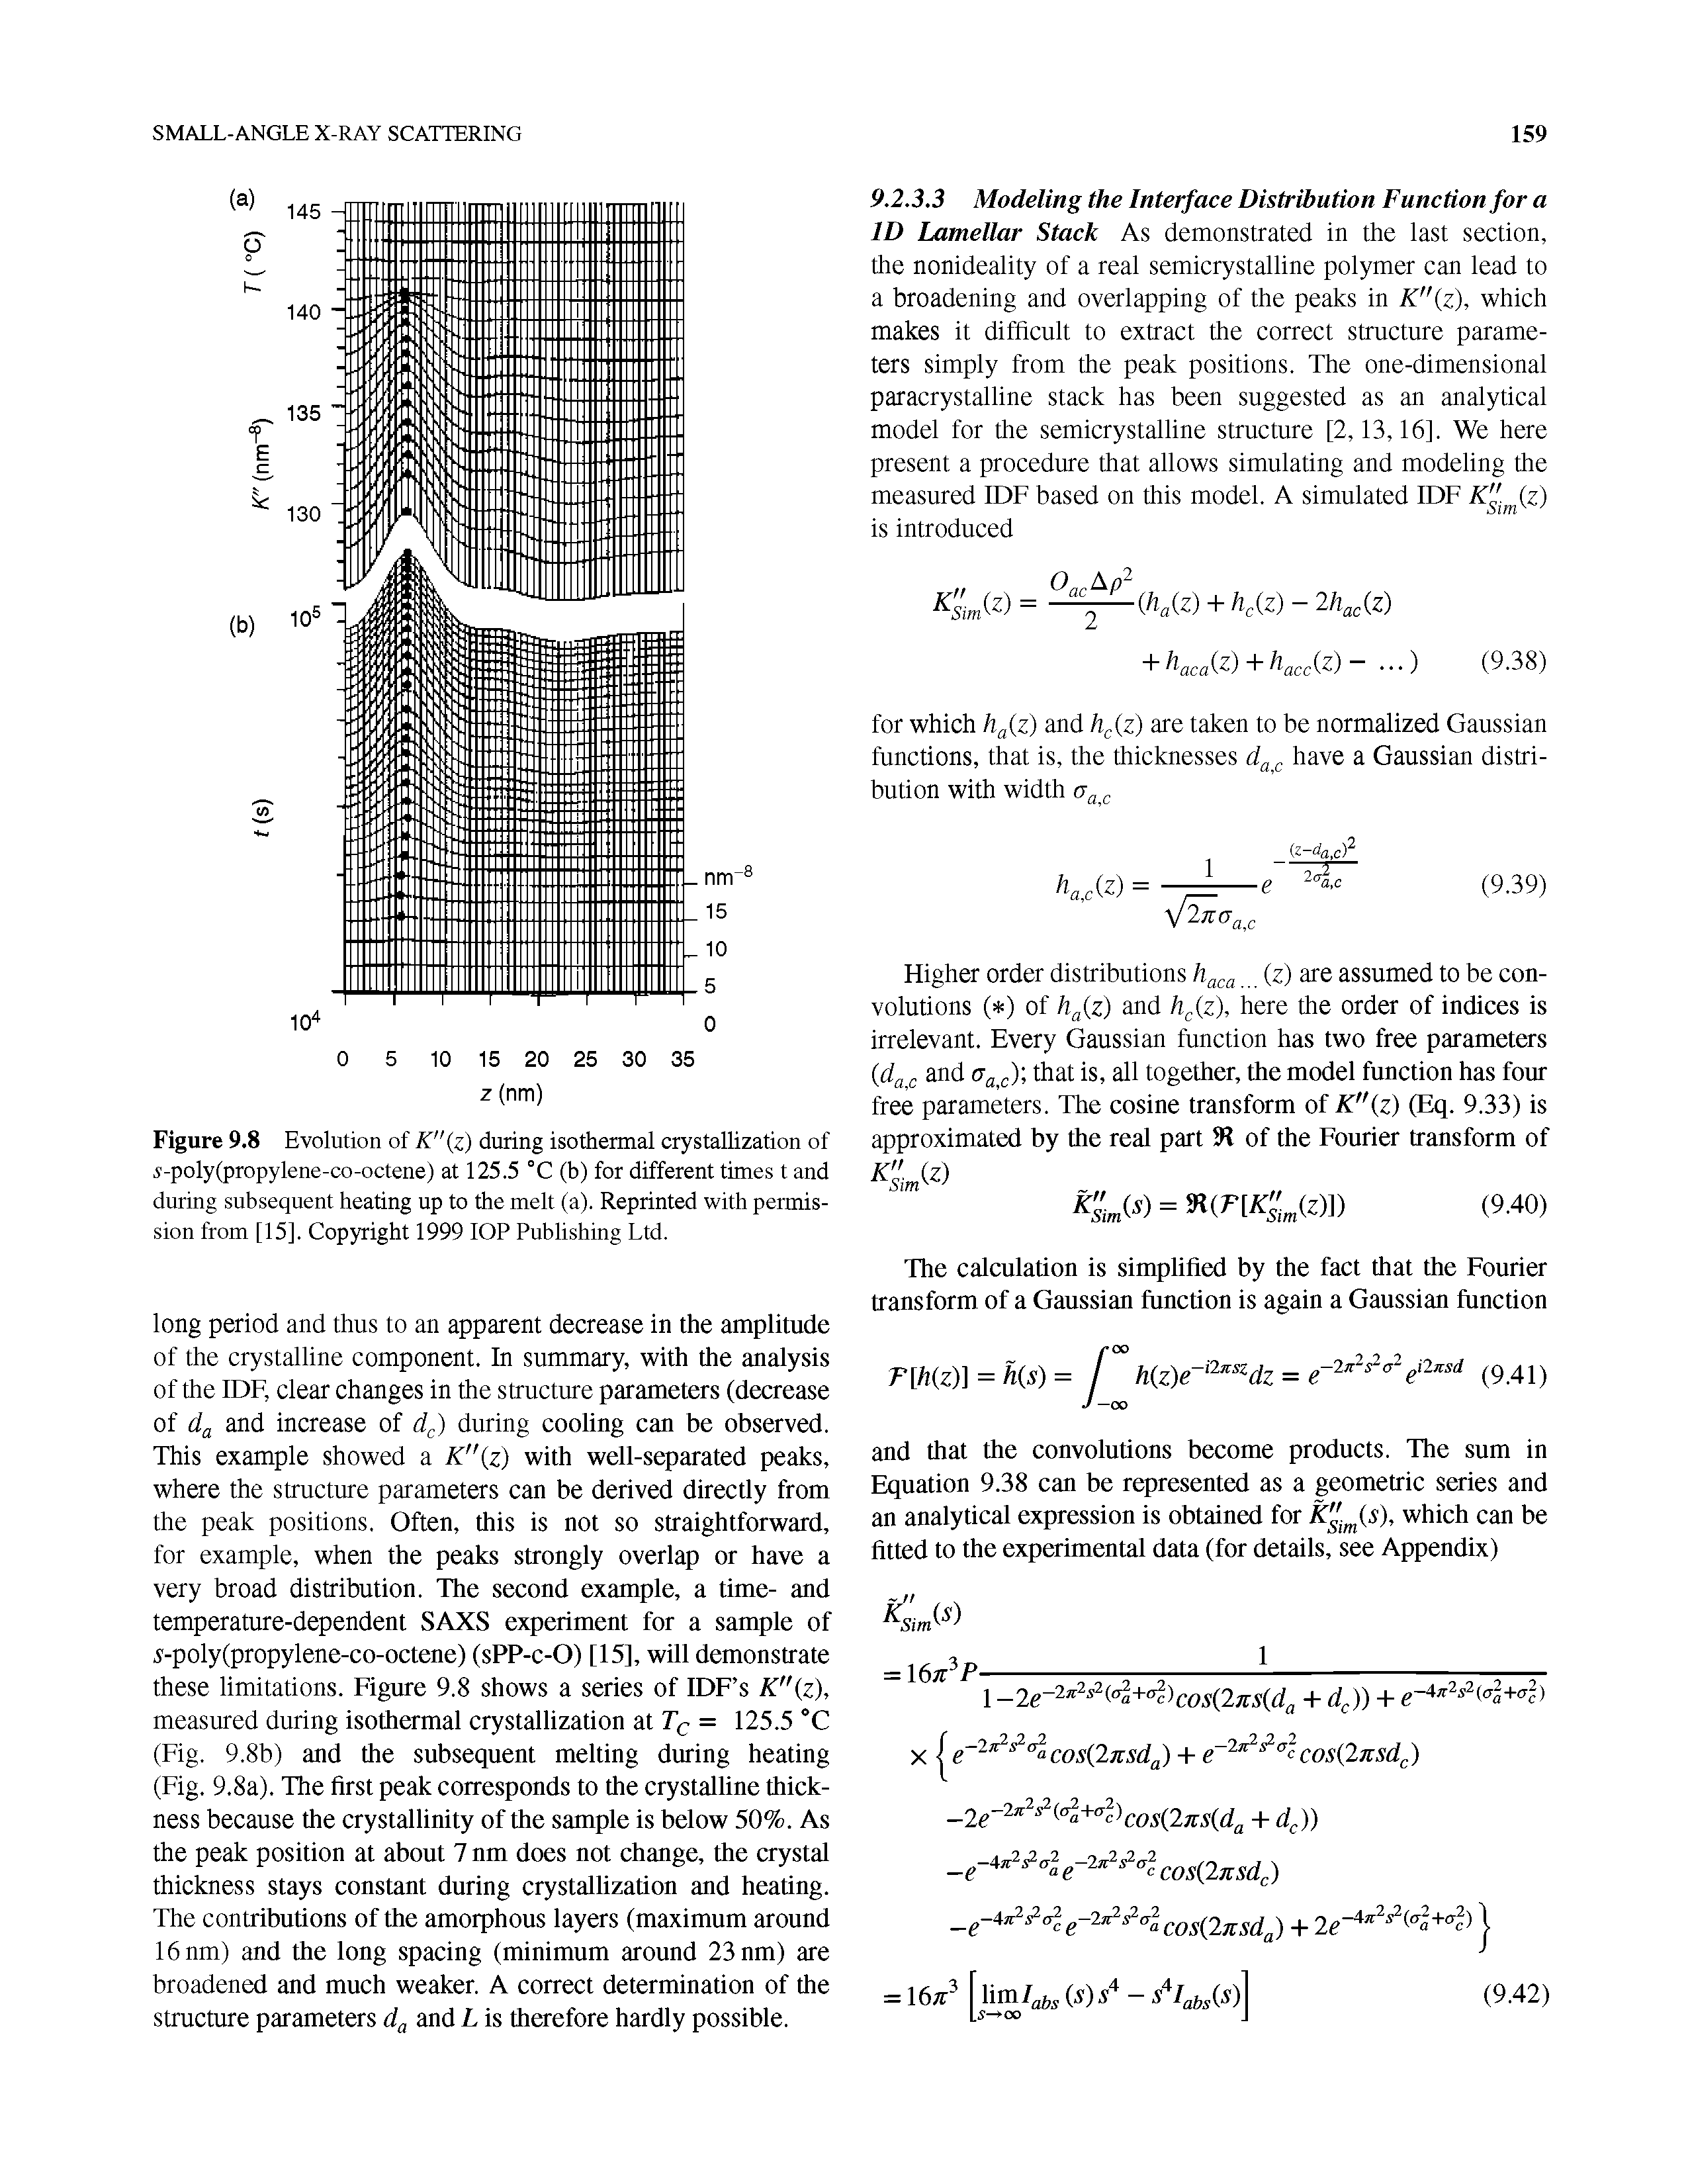 Figure 9.8 Evolution of K" z) during isothermal crystallization of i-poly(propylene-co-octene) at 125.5 °C (b) for different times t and during subsequent heating up to the melt (a). Reprinted with permission from [15]. Copyright 1999 lOP Publishing Ltd.